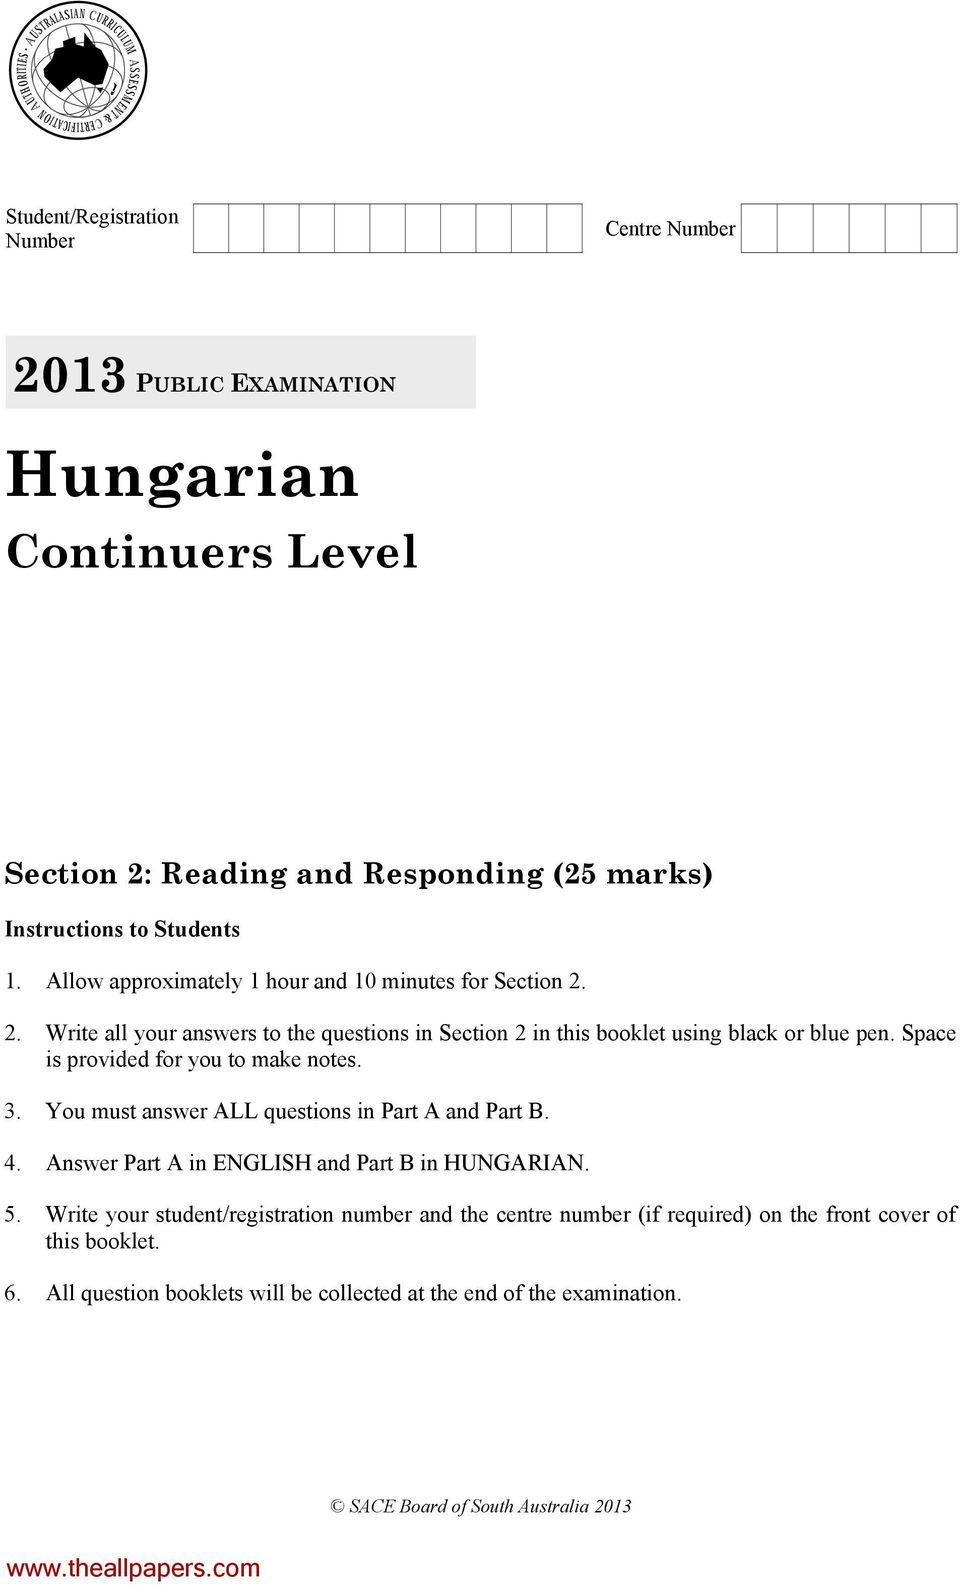 Space is provided for you to make notes. 3. You must answer ALL questions in Part A and Part B. 4. Answer Part A in ENGLISH and Part B in HUNGARIAN. 5.